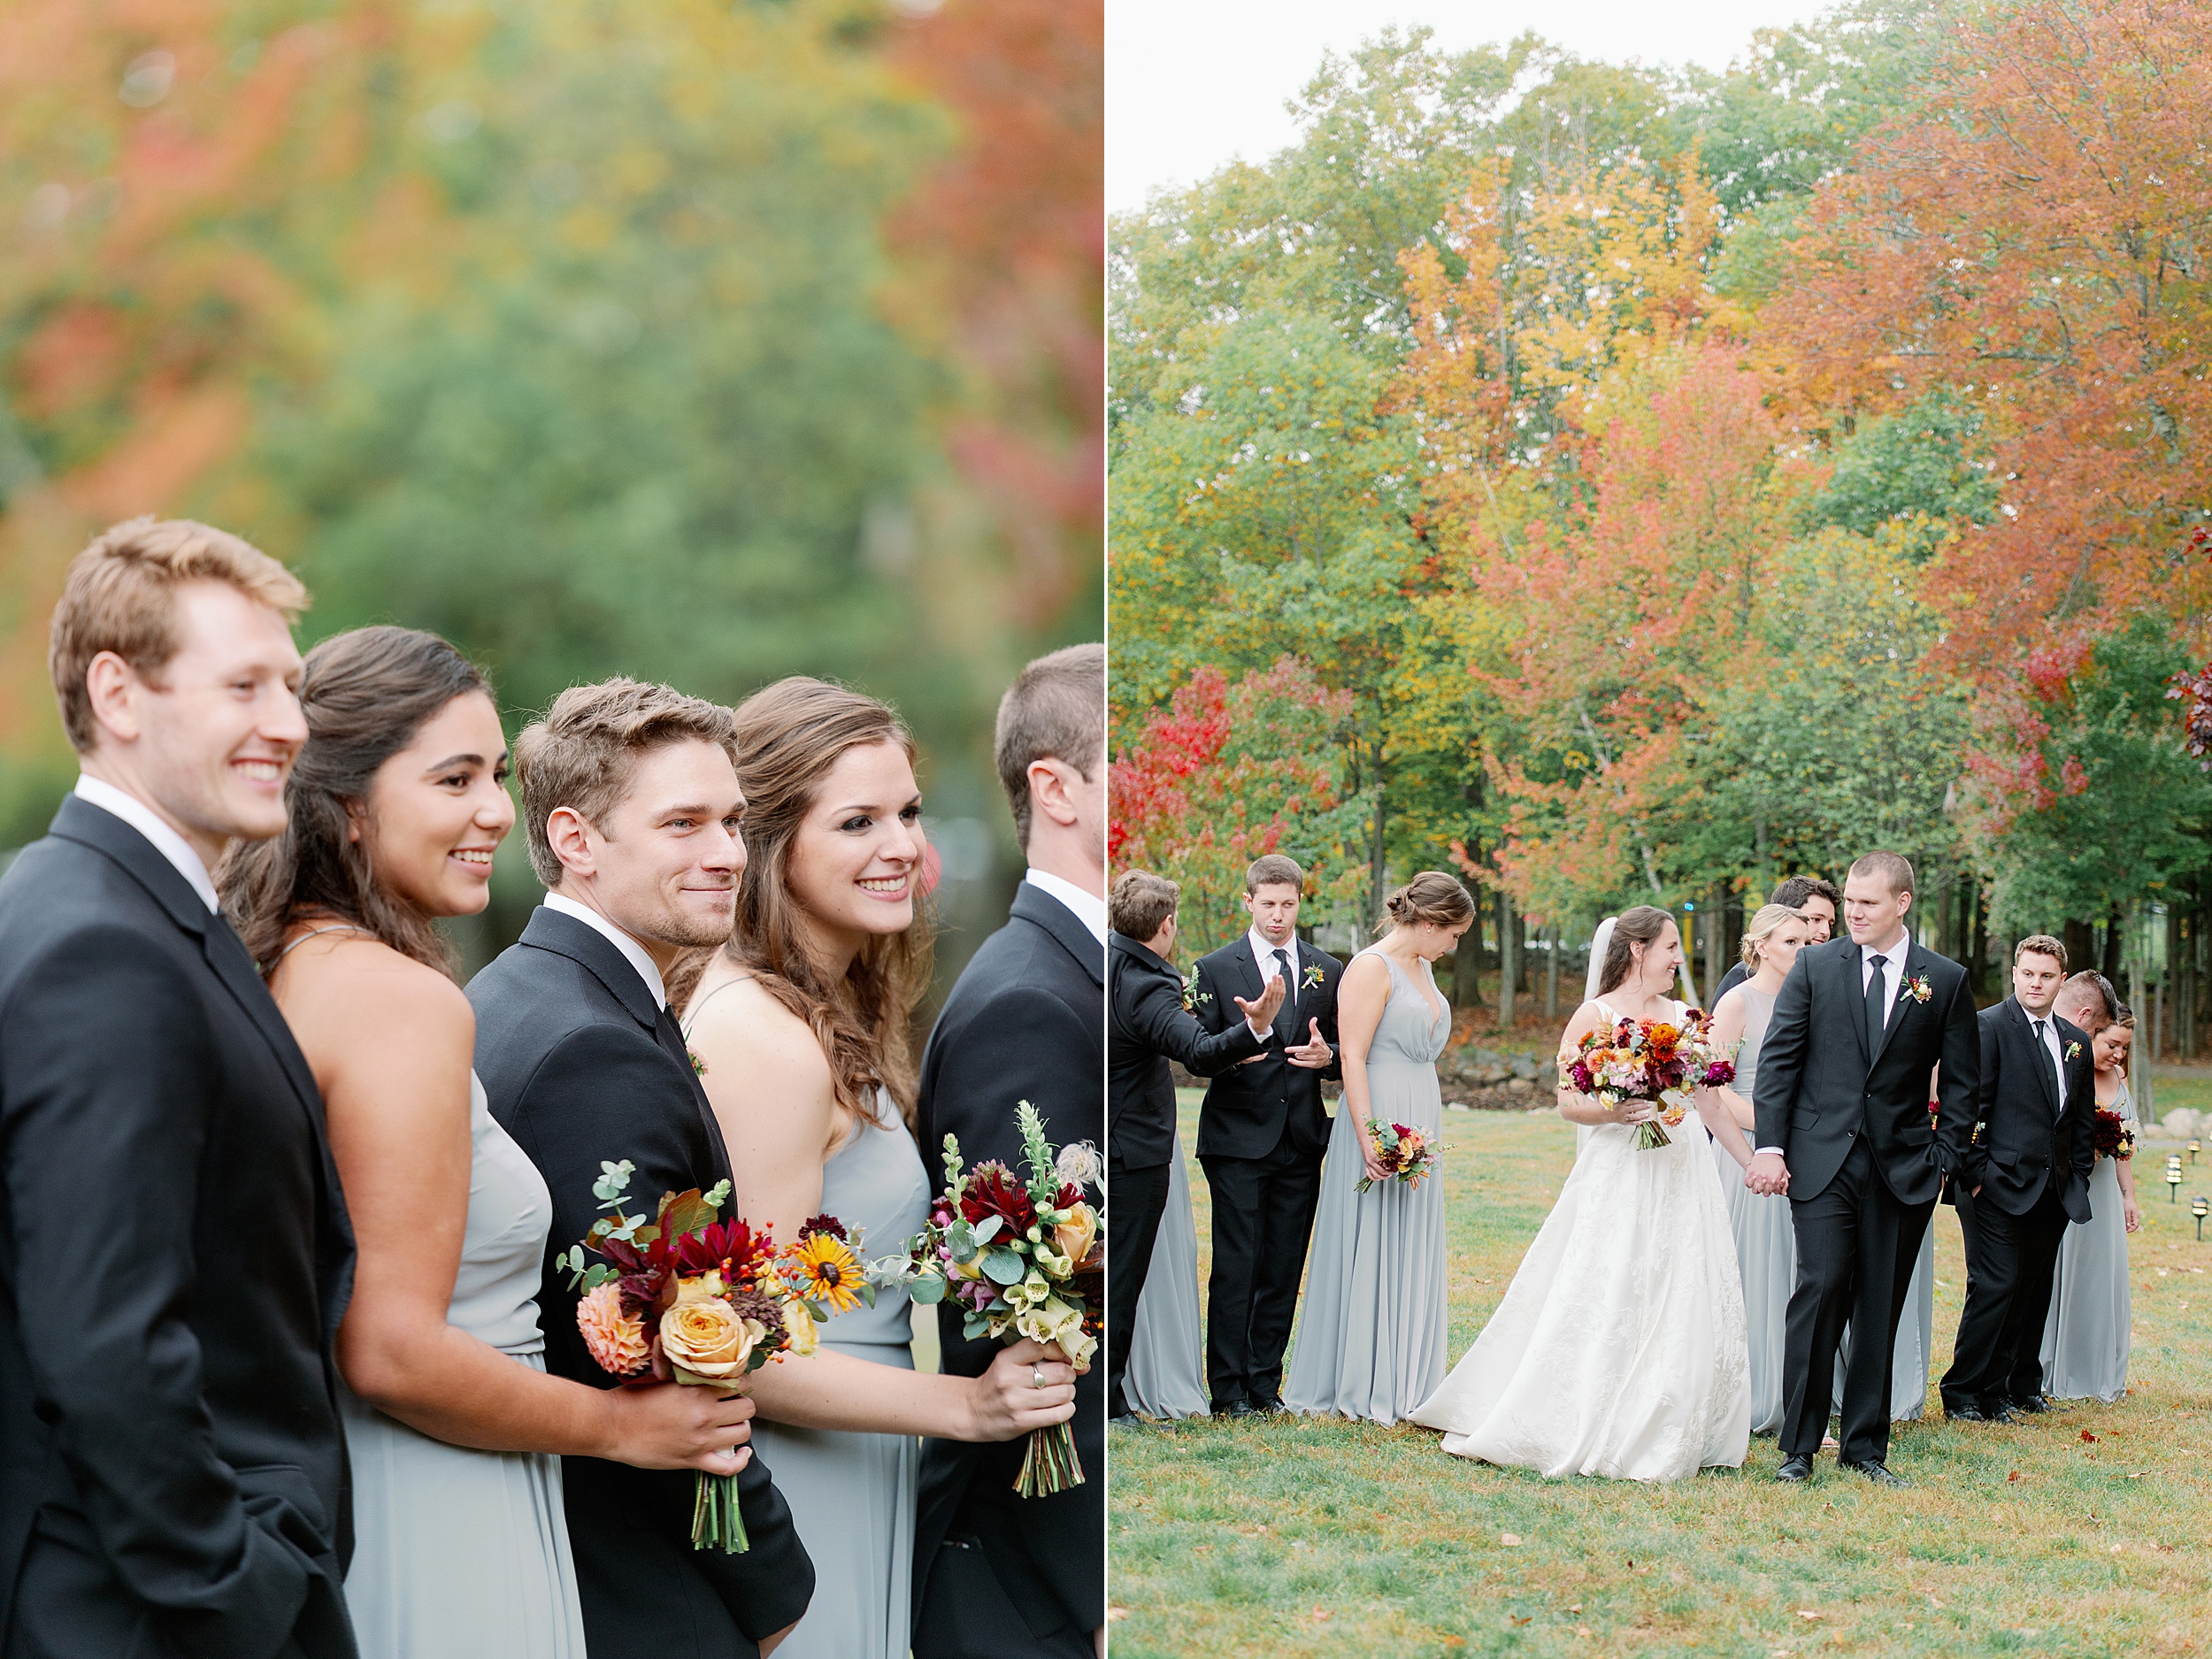 wedding party portraits in dove gray dresses and tuxes at The Stone Barn wedding in Maine